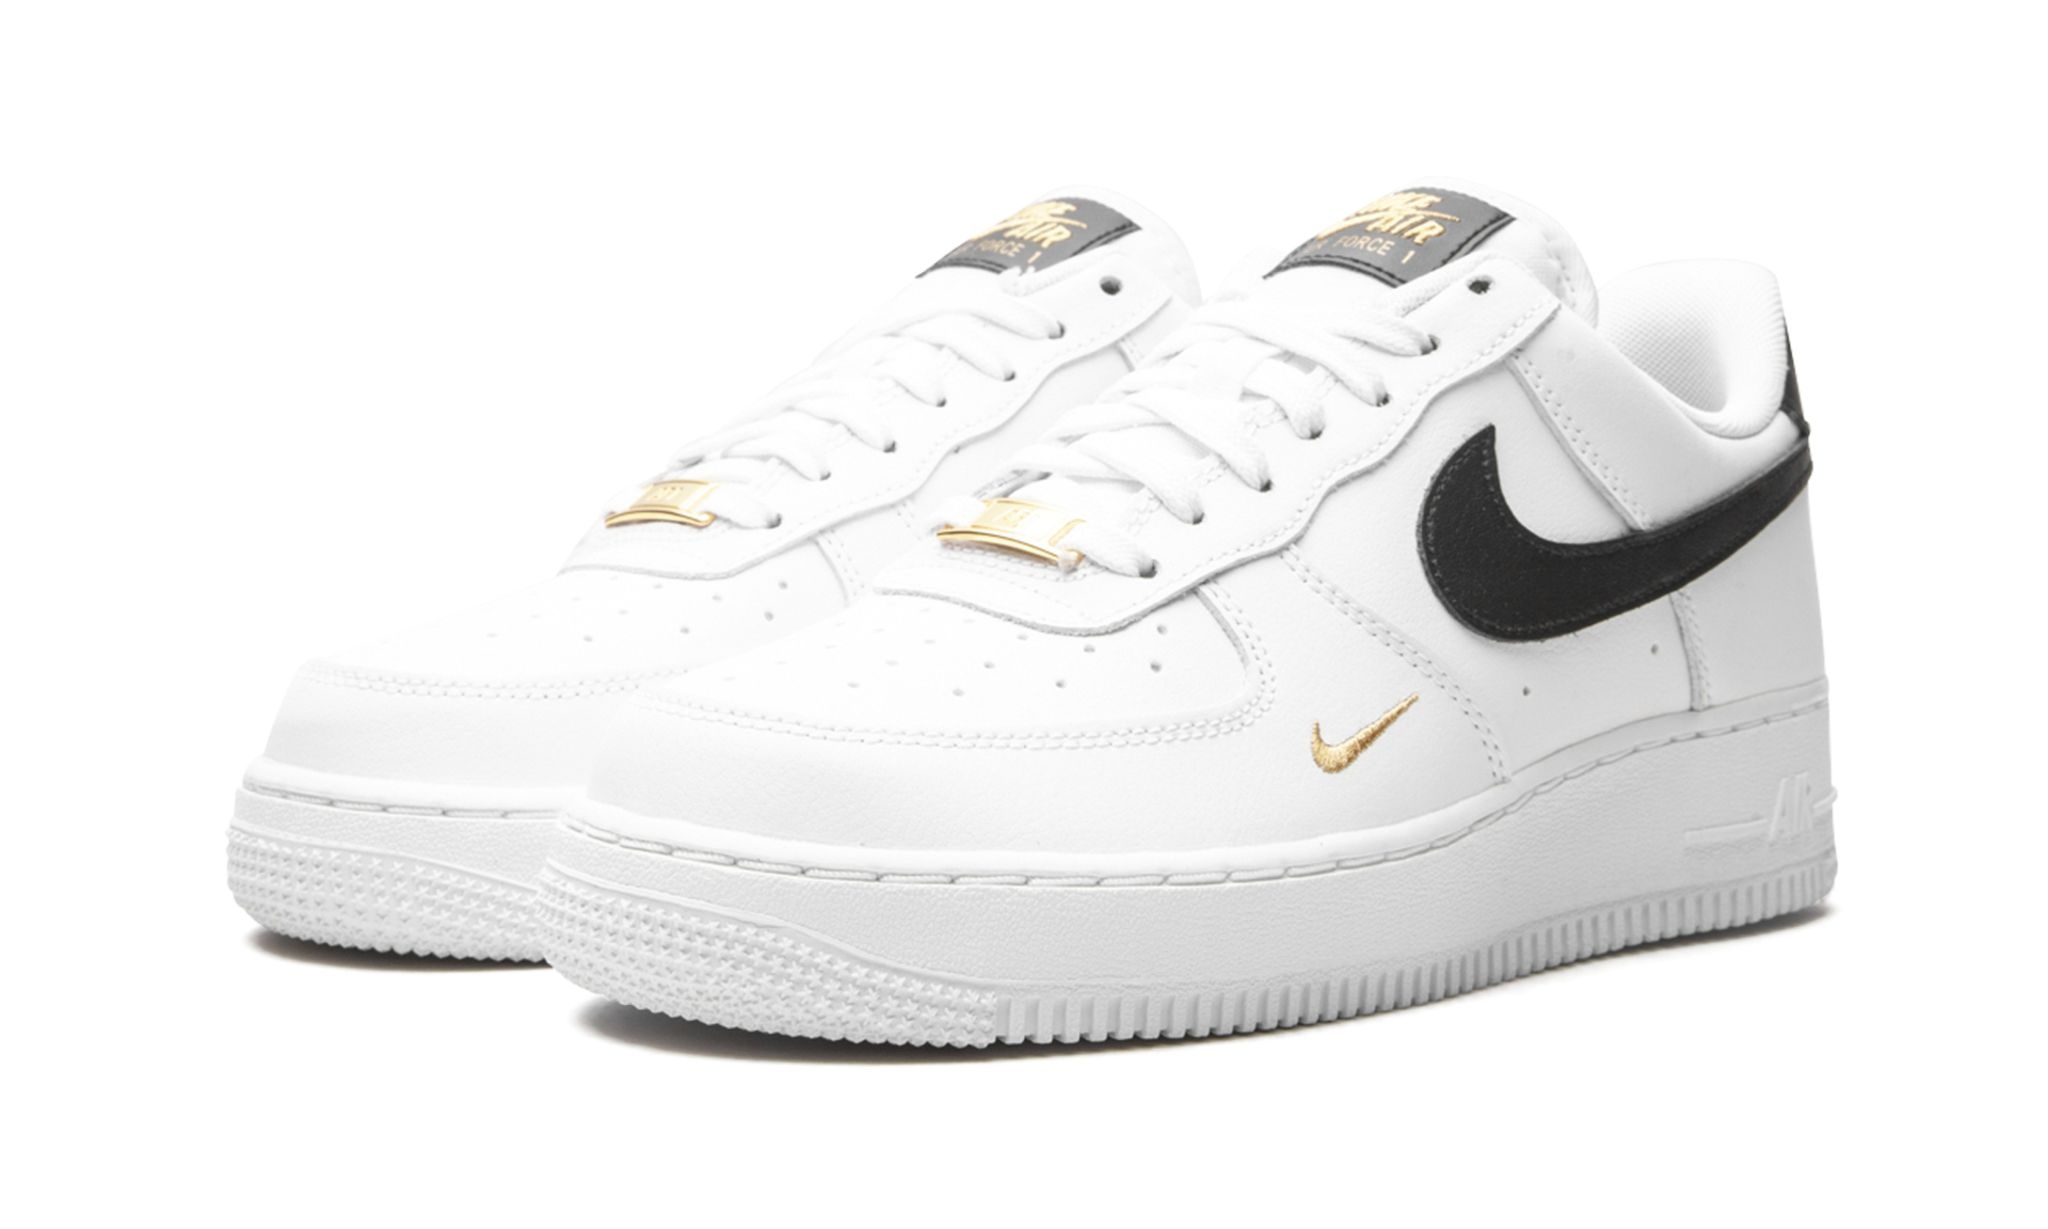 WMNS Air Force 1 Low Essential "White / Black / Gold" - 2